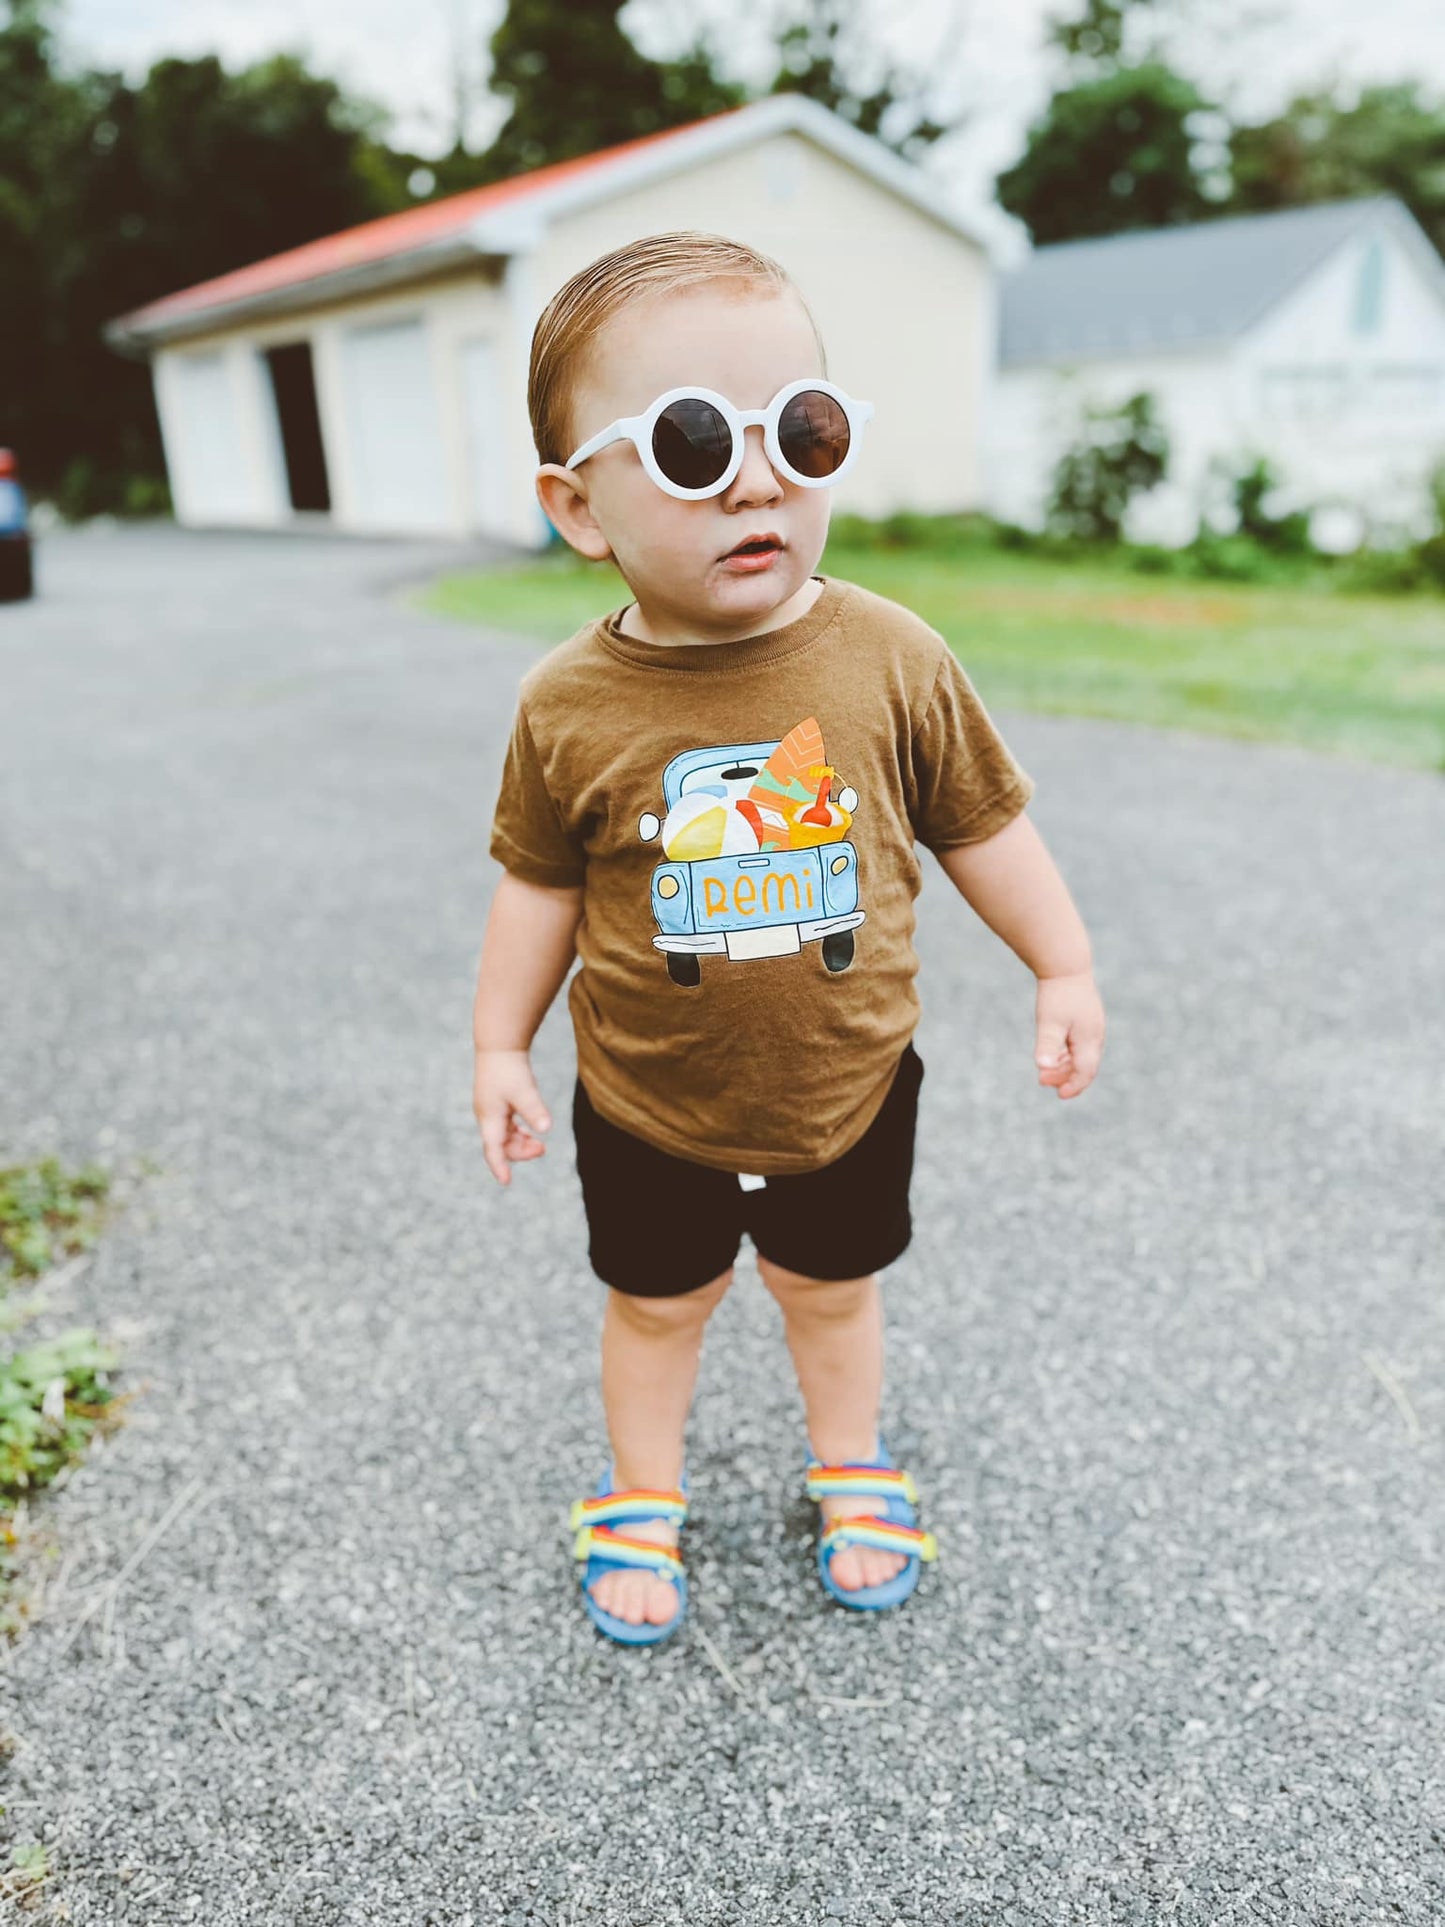 Toddler Tee Subscription